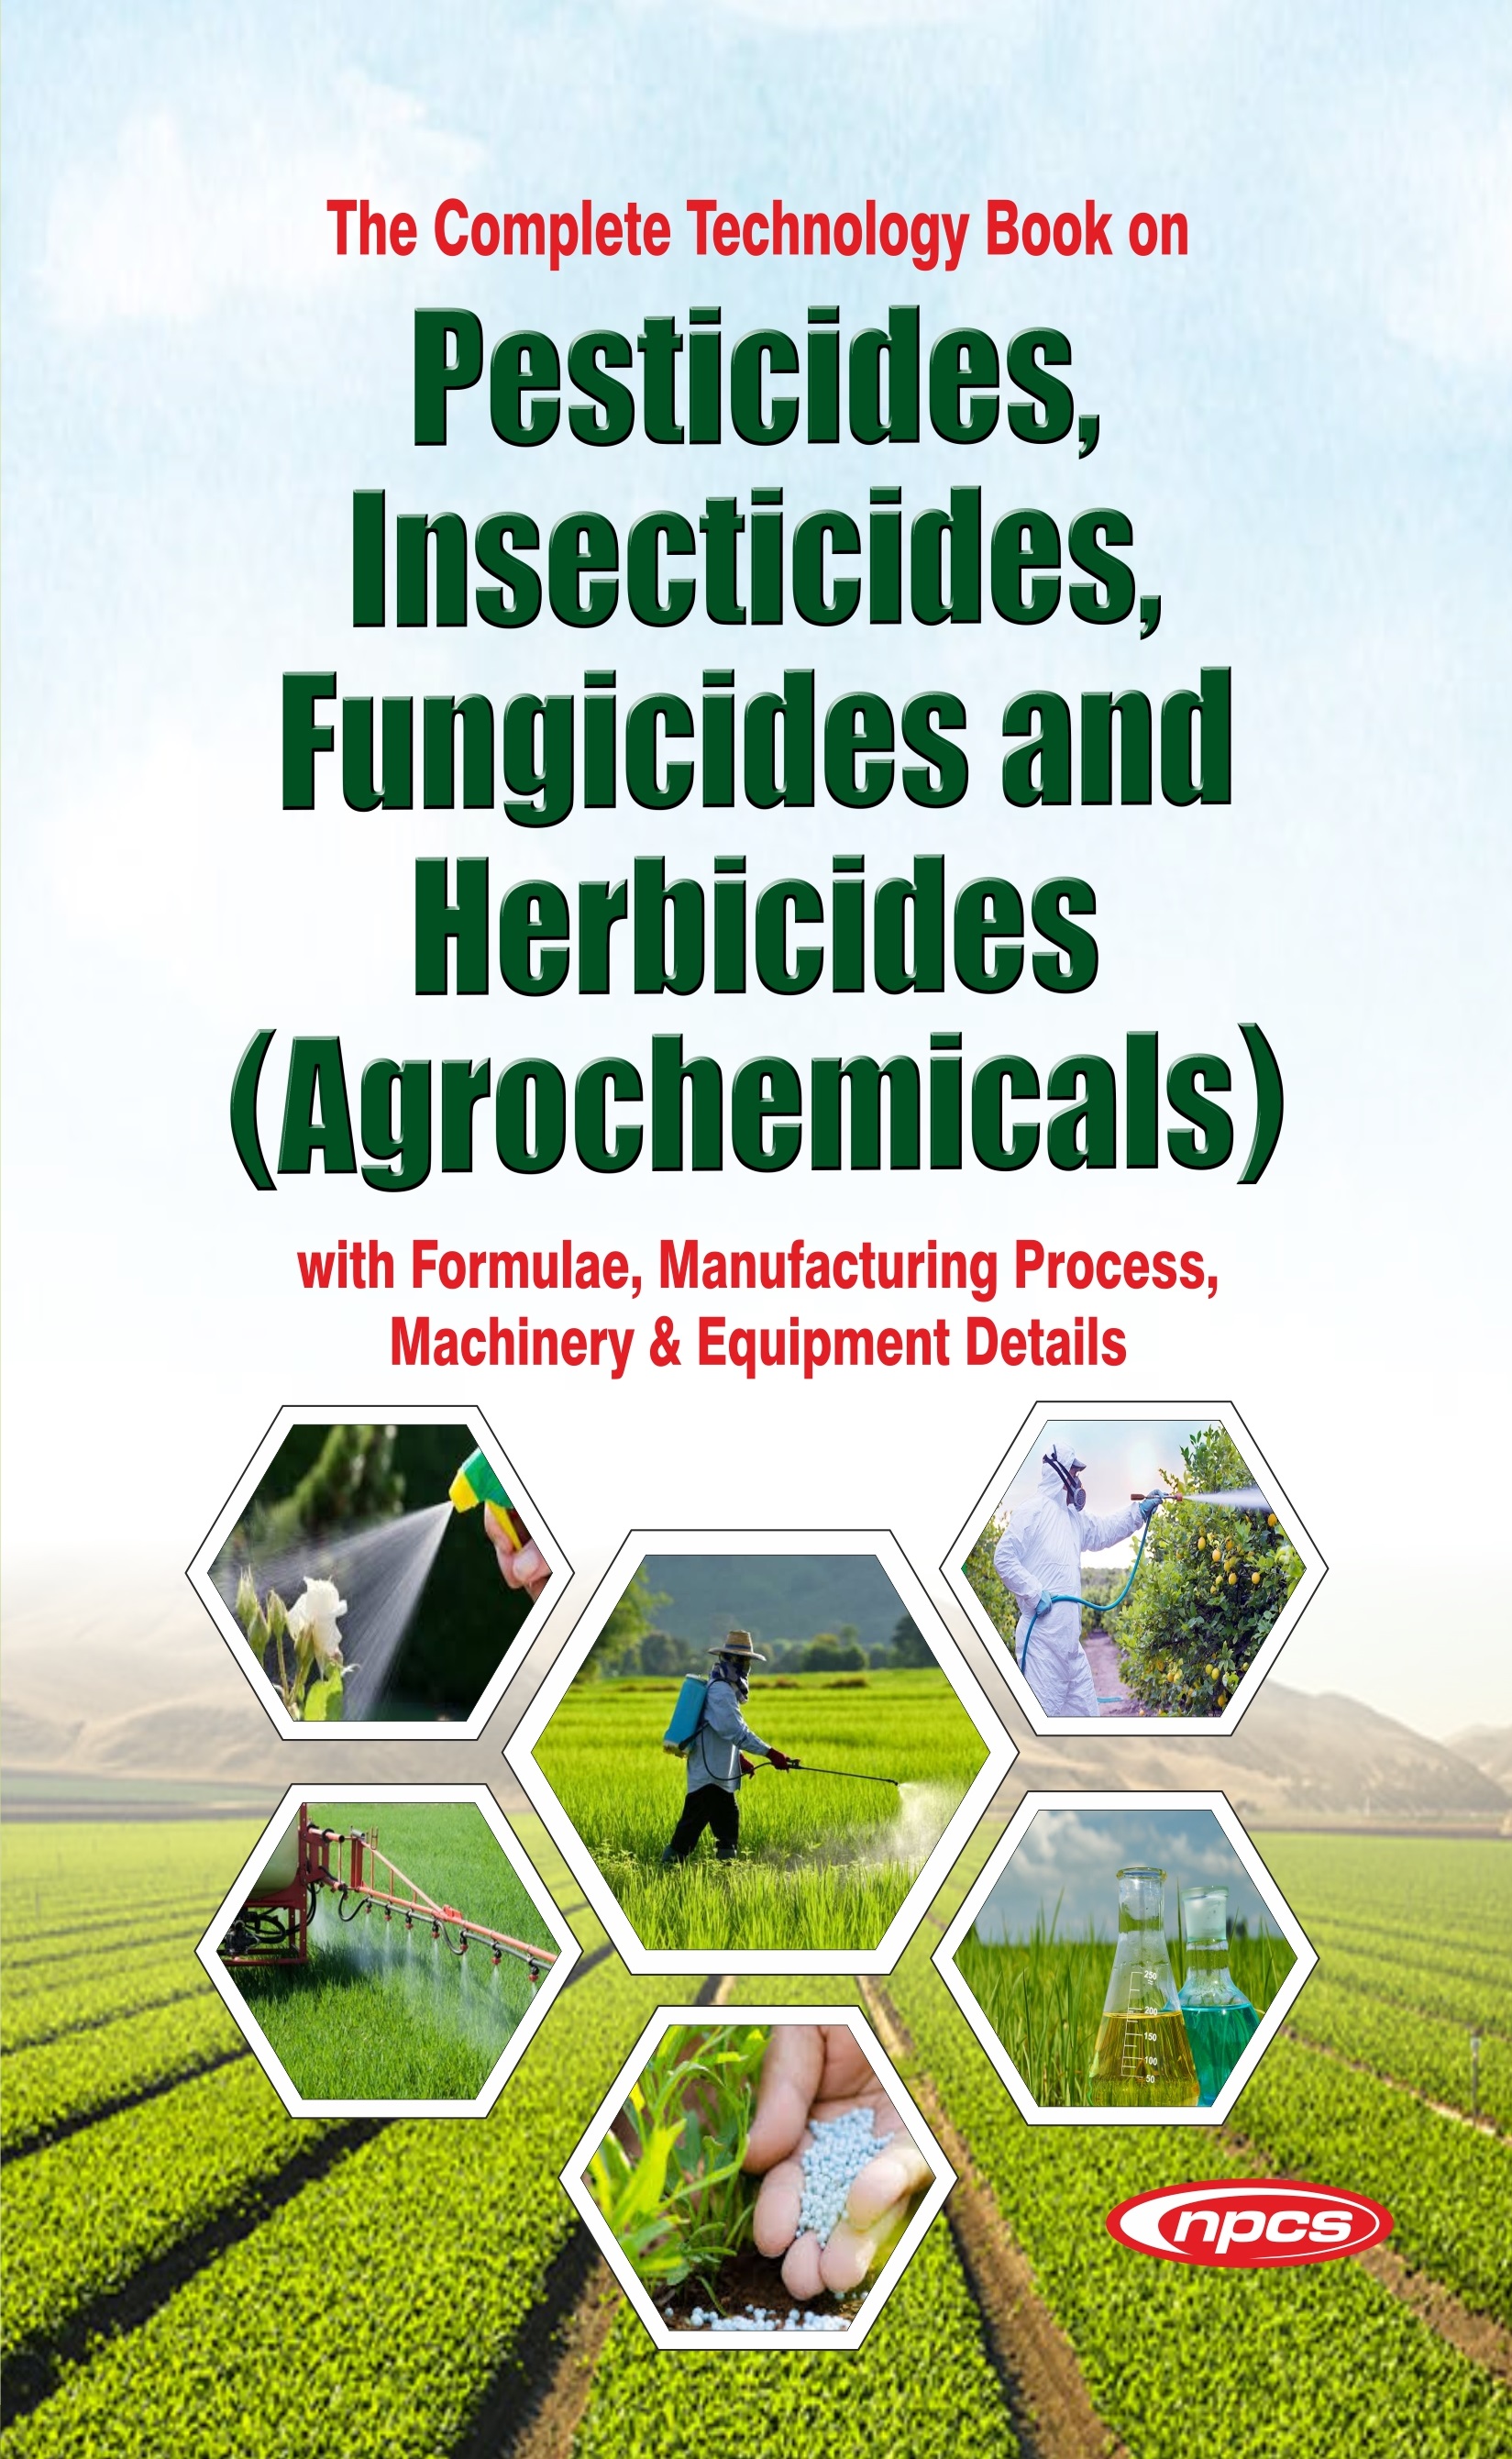 titles for an essay about pesticides